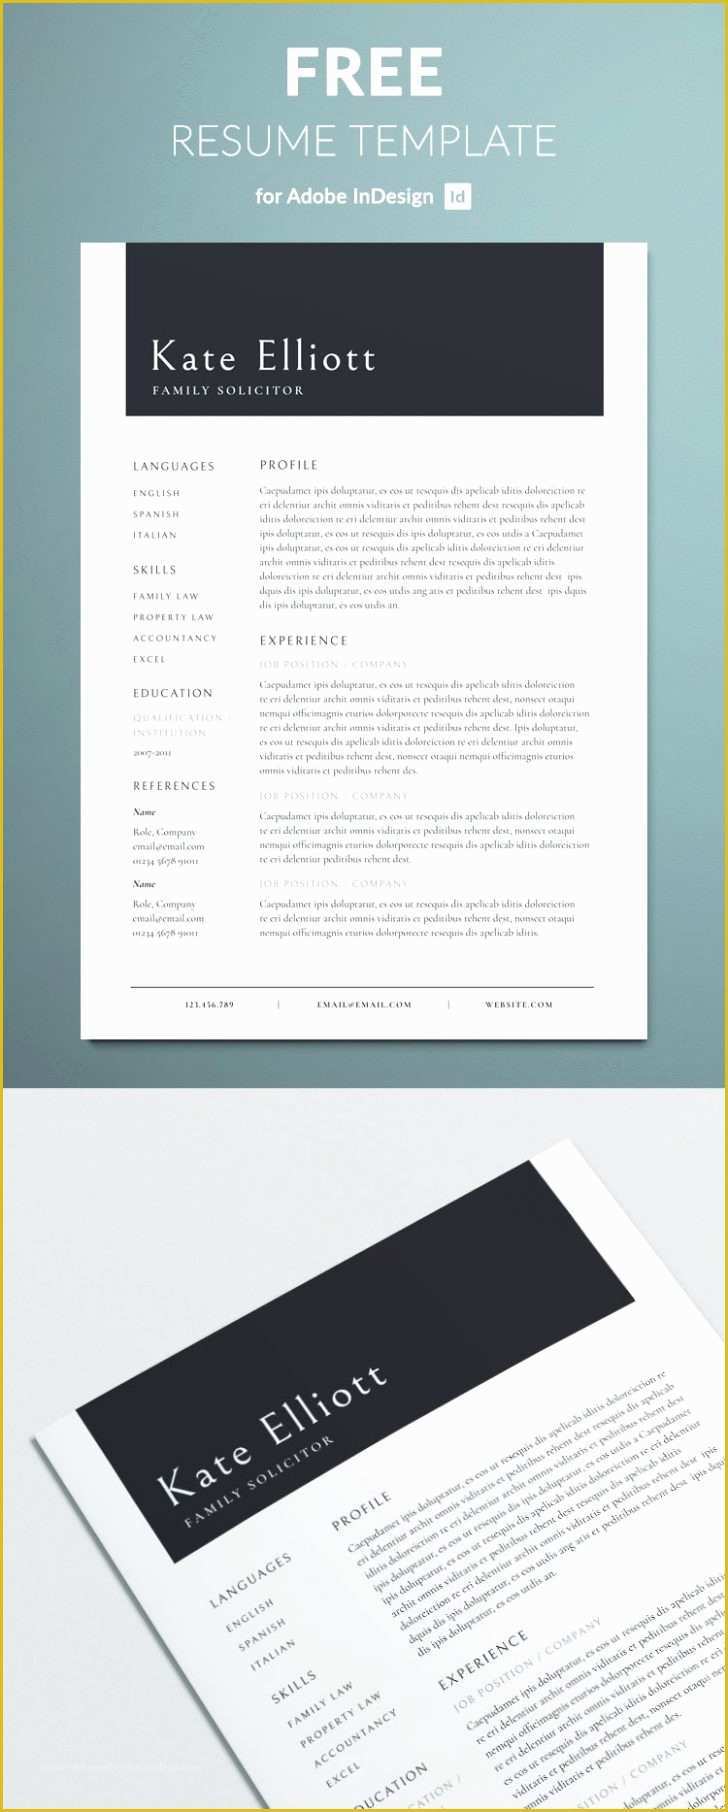 Free Windows Resume Templates Of Resume and Template Fabulous Indesign Resume Template